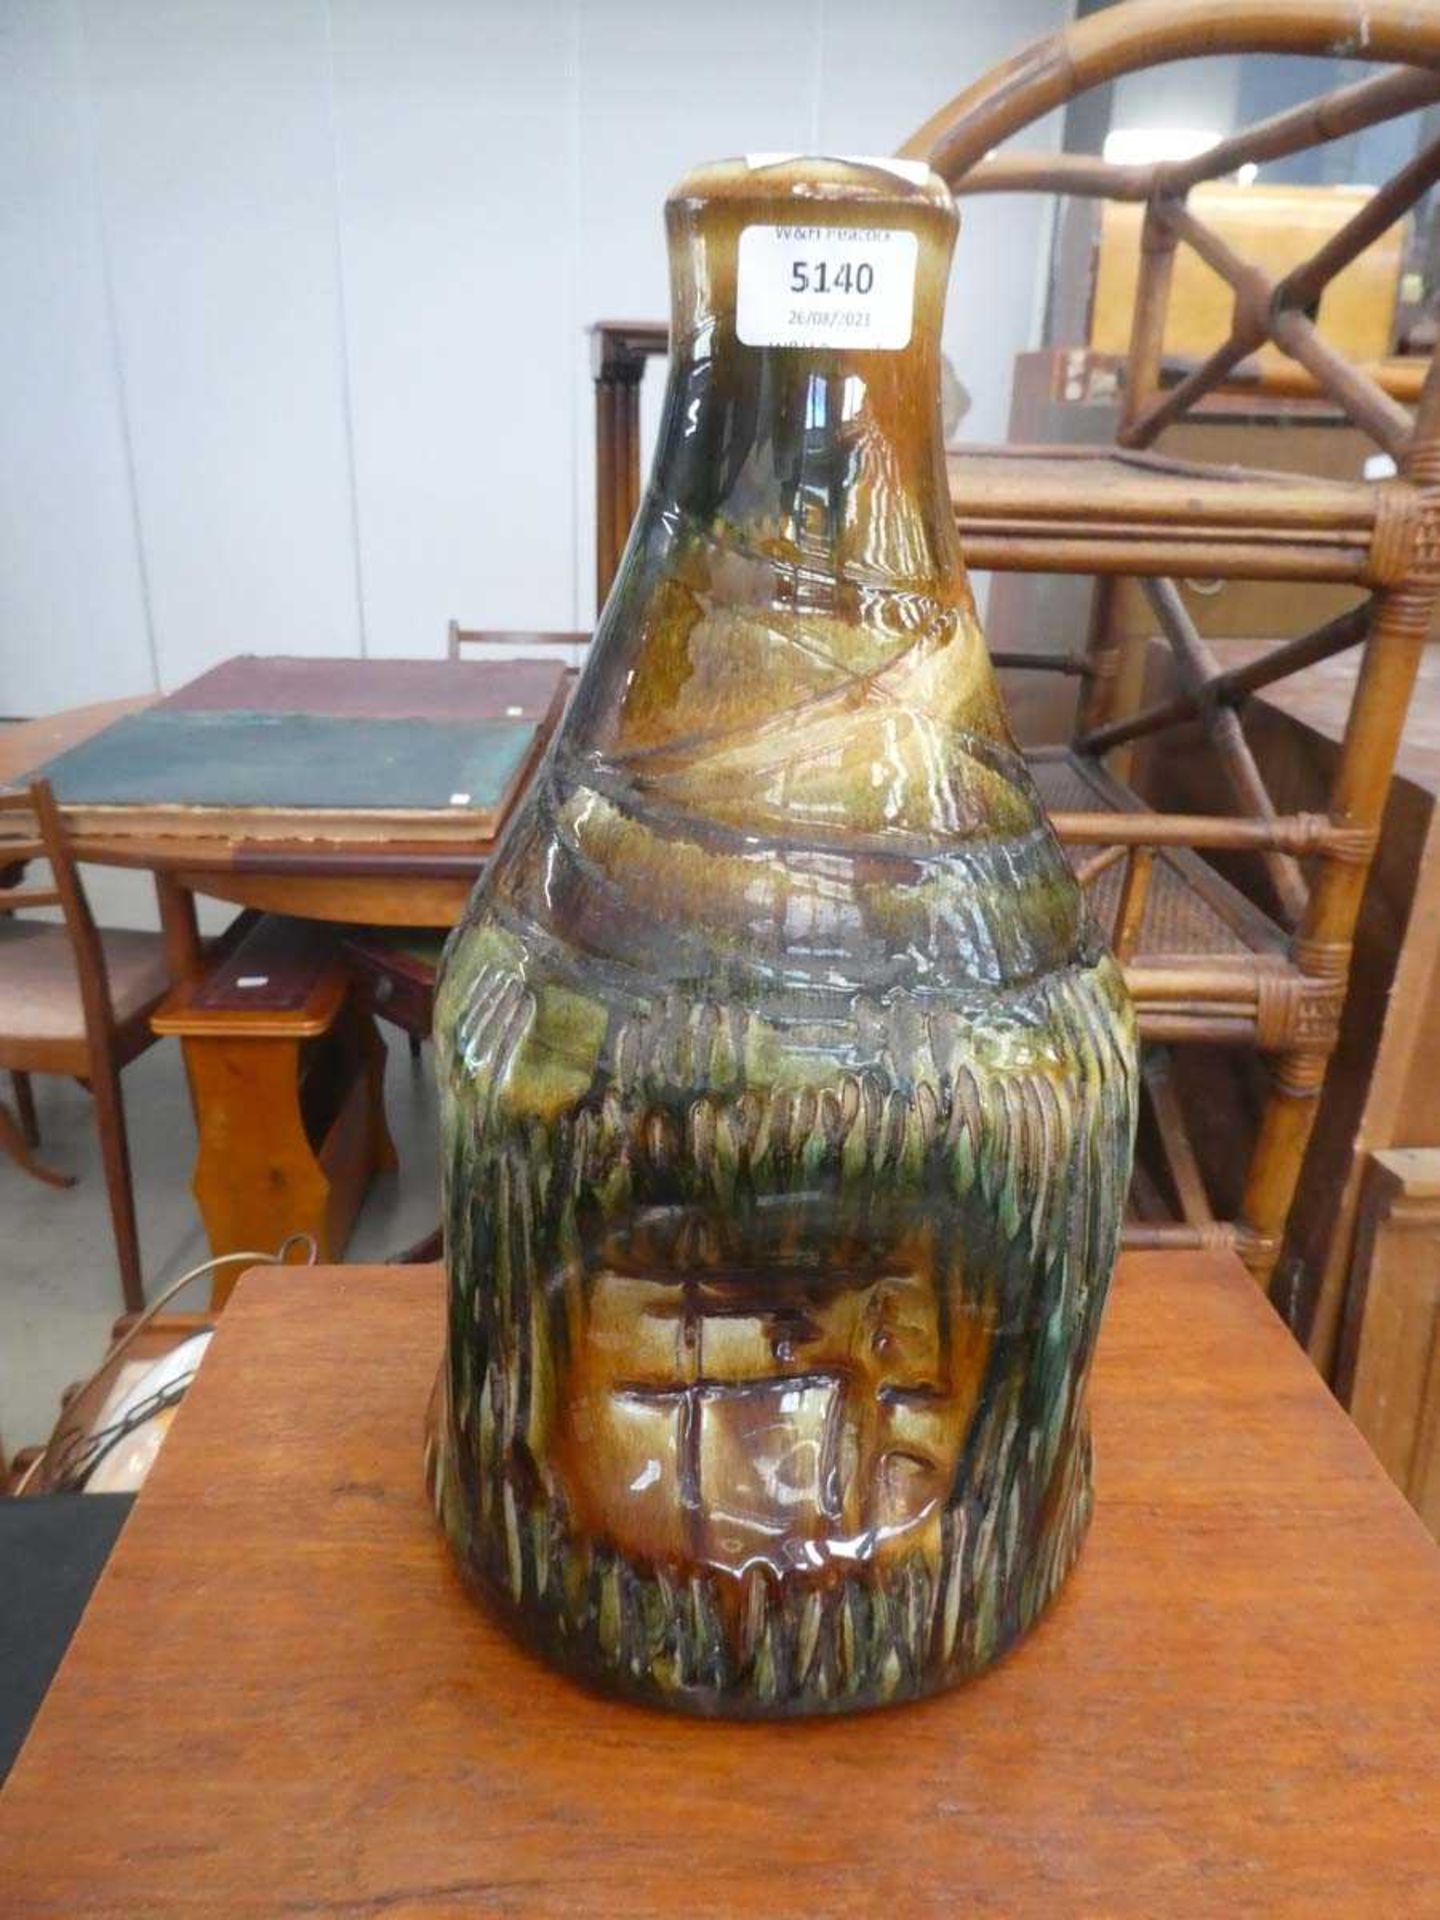 Earthenware lamp base decorated with brown and green glazes